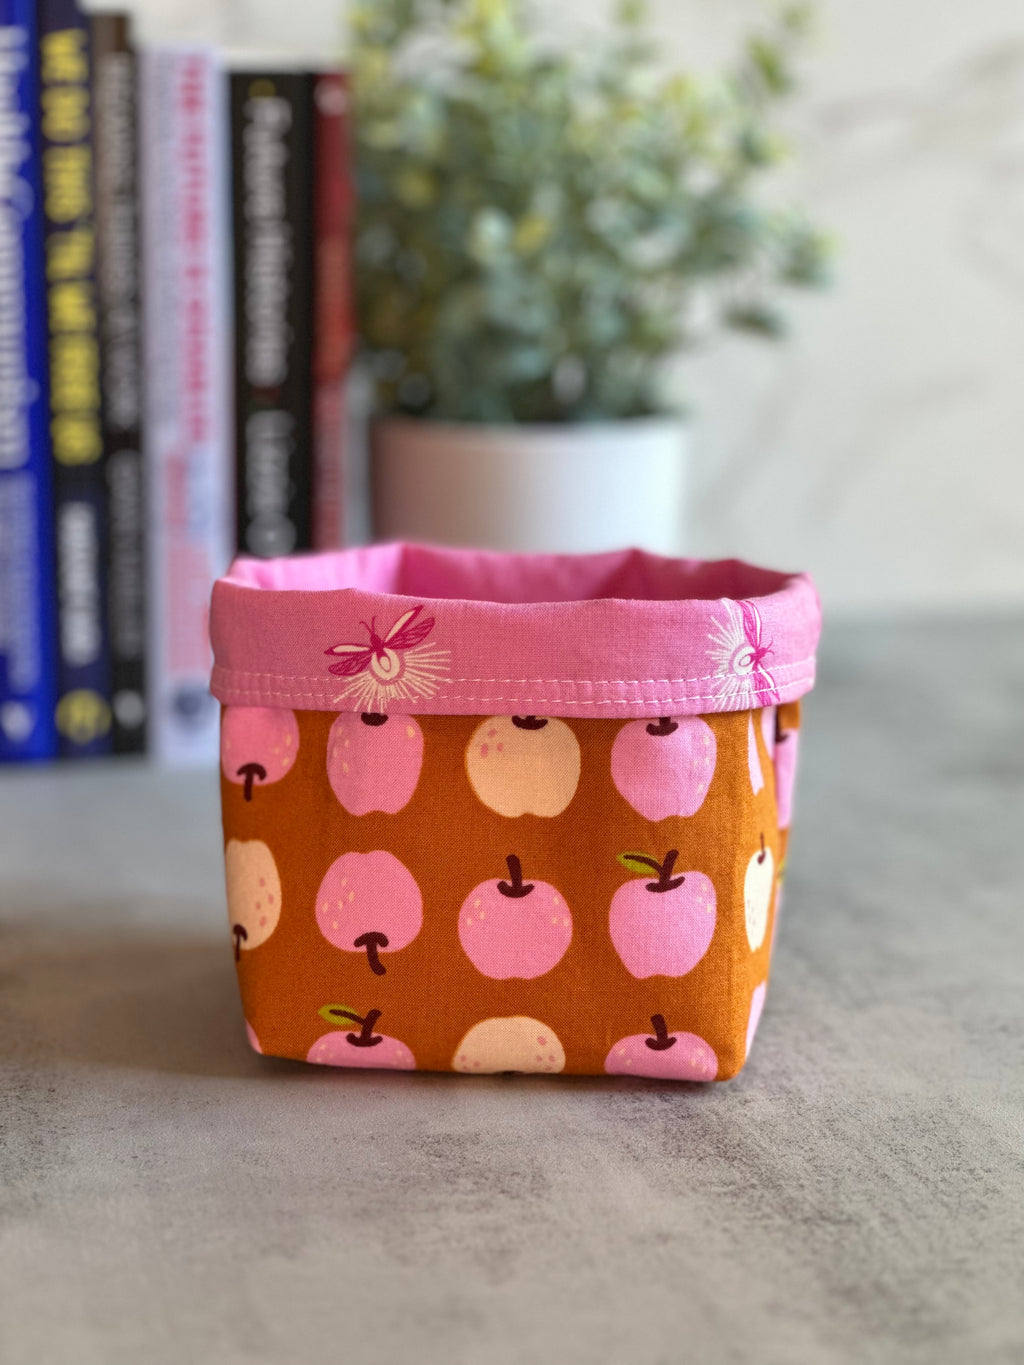 Small fabric basket / plant cozy - apples